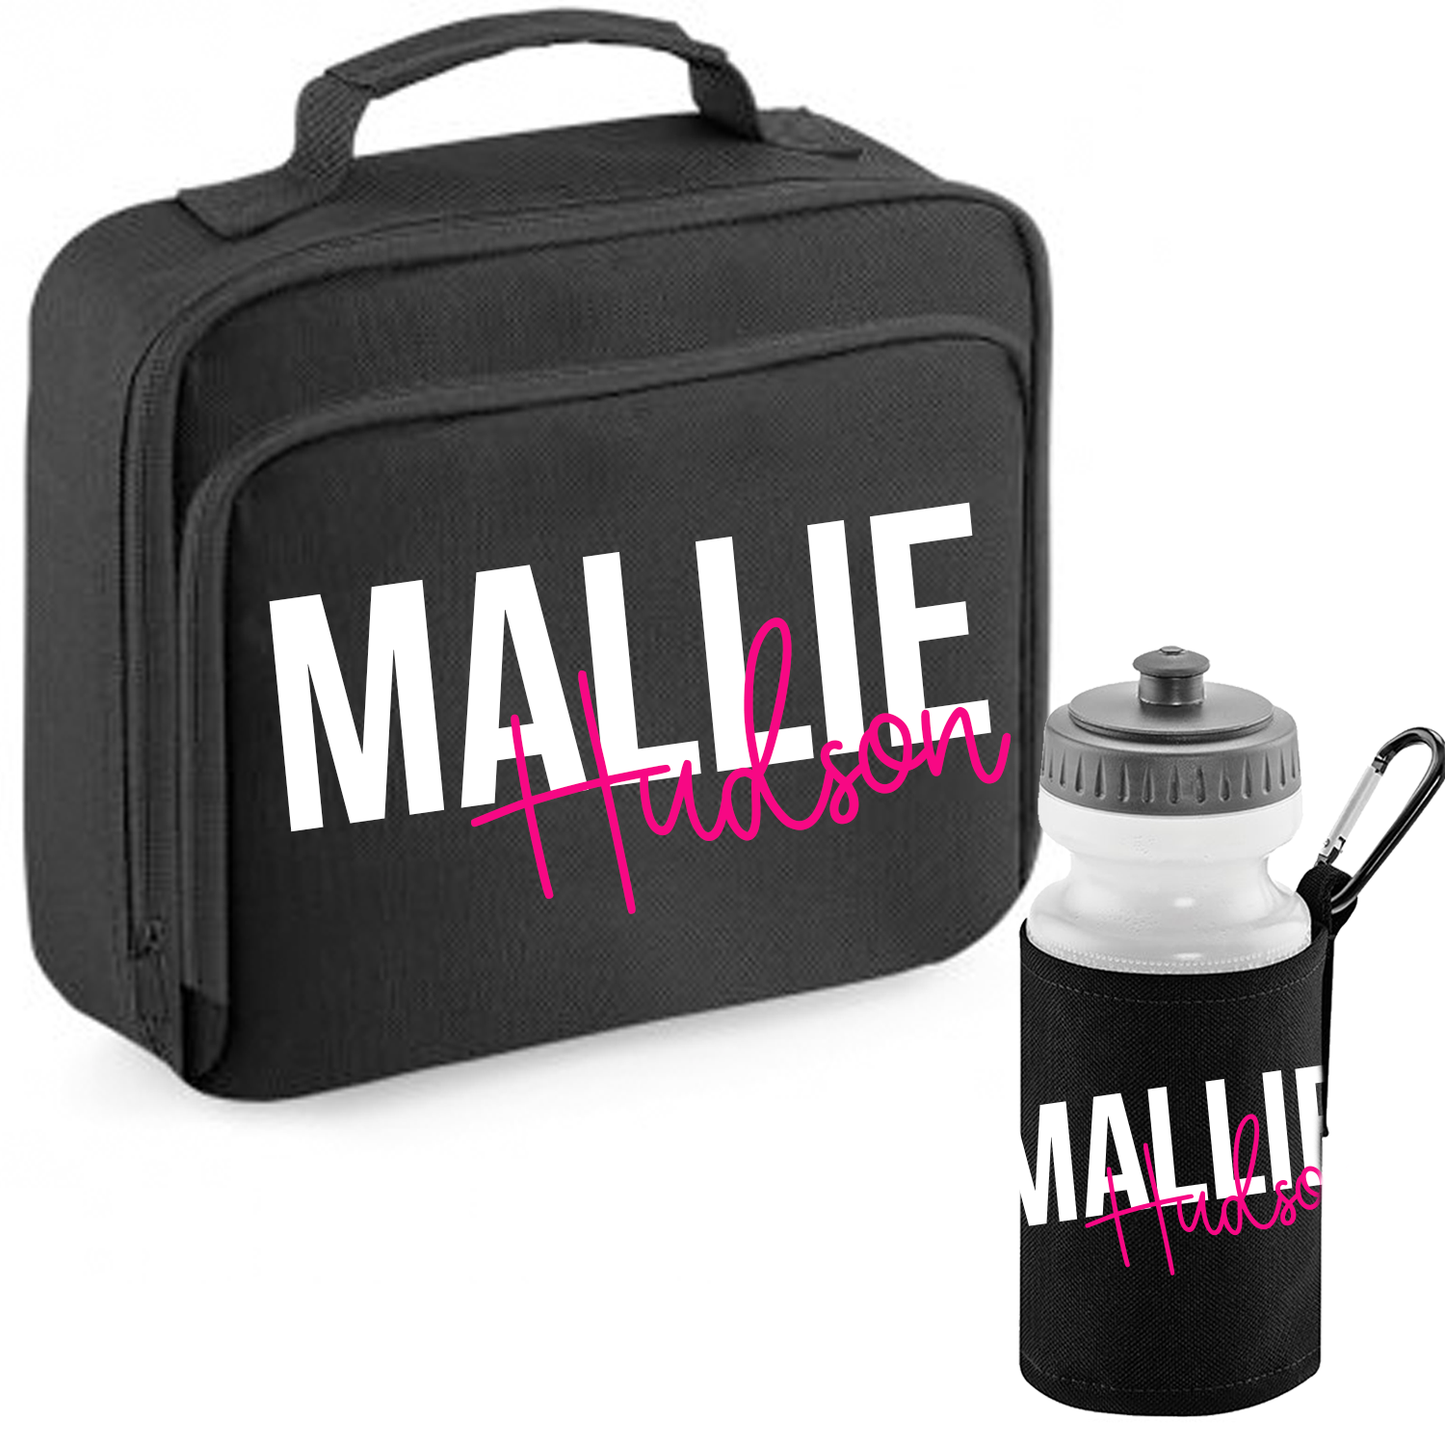 Personalised Black Lunch Box & Water Bottle Set - different colour options available.